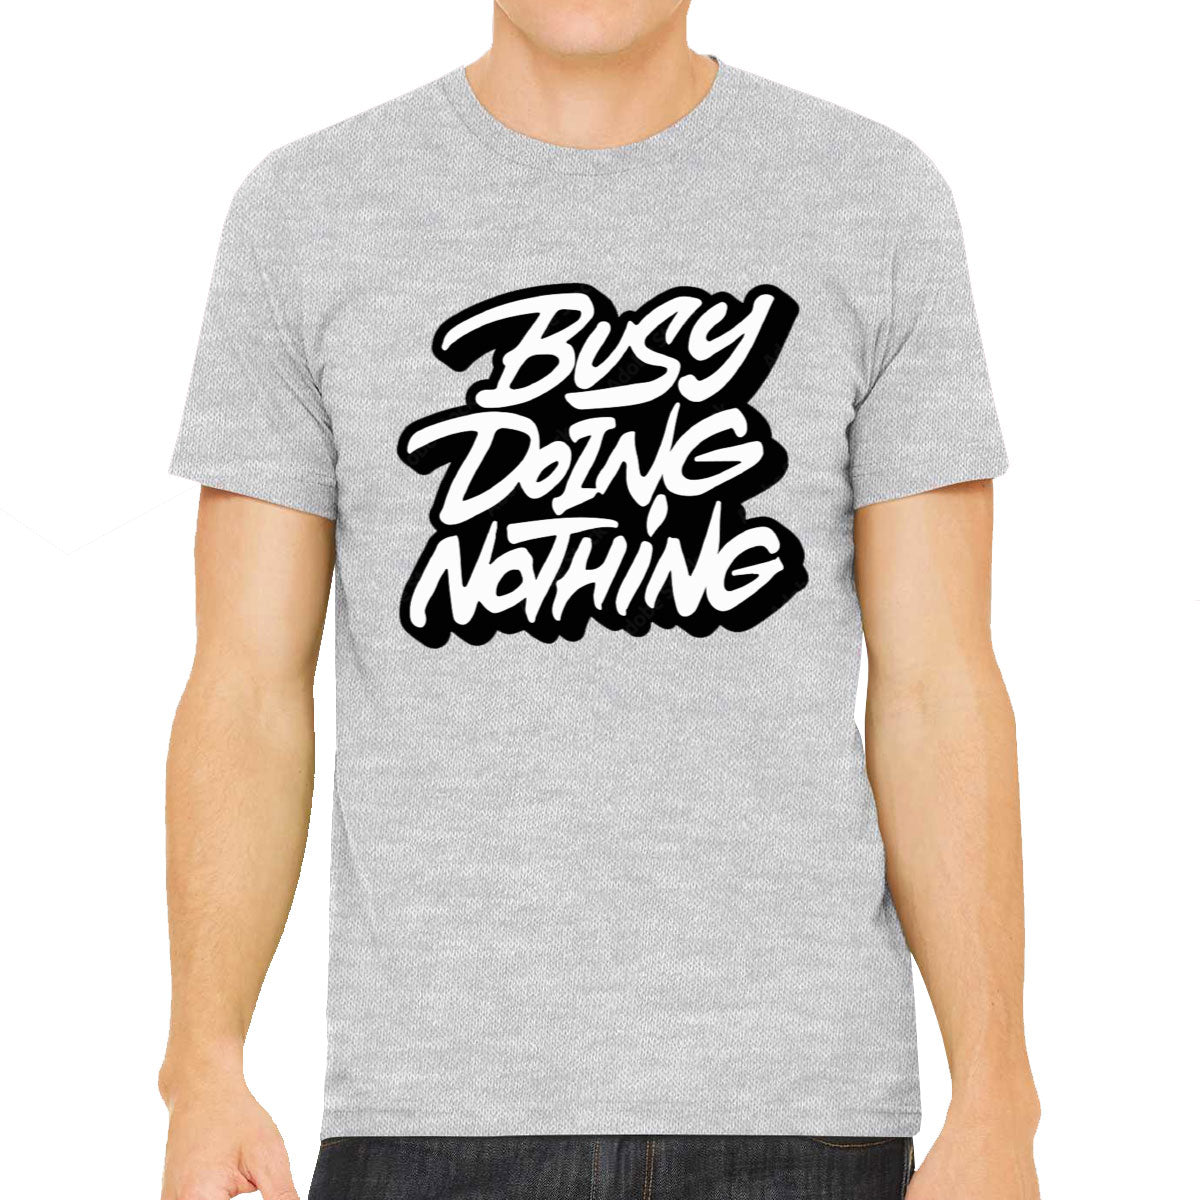 Busy Doing Nothing Men's T-shirt